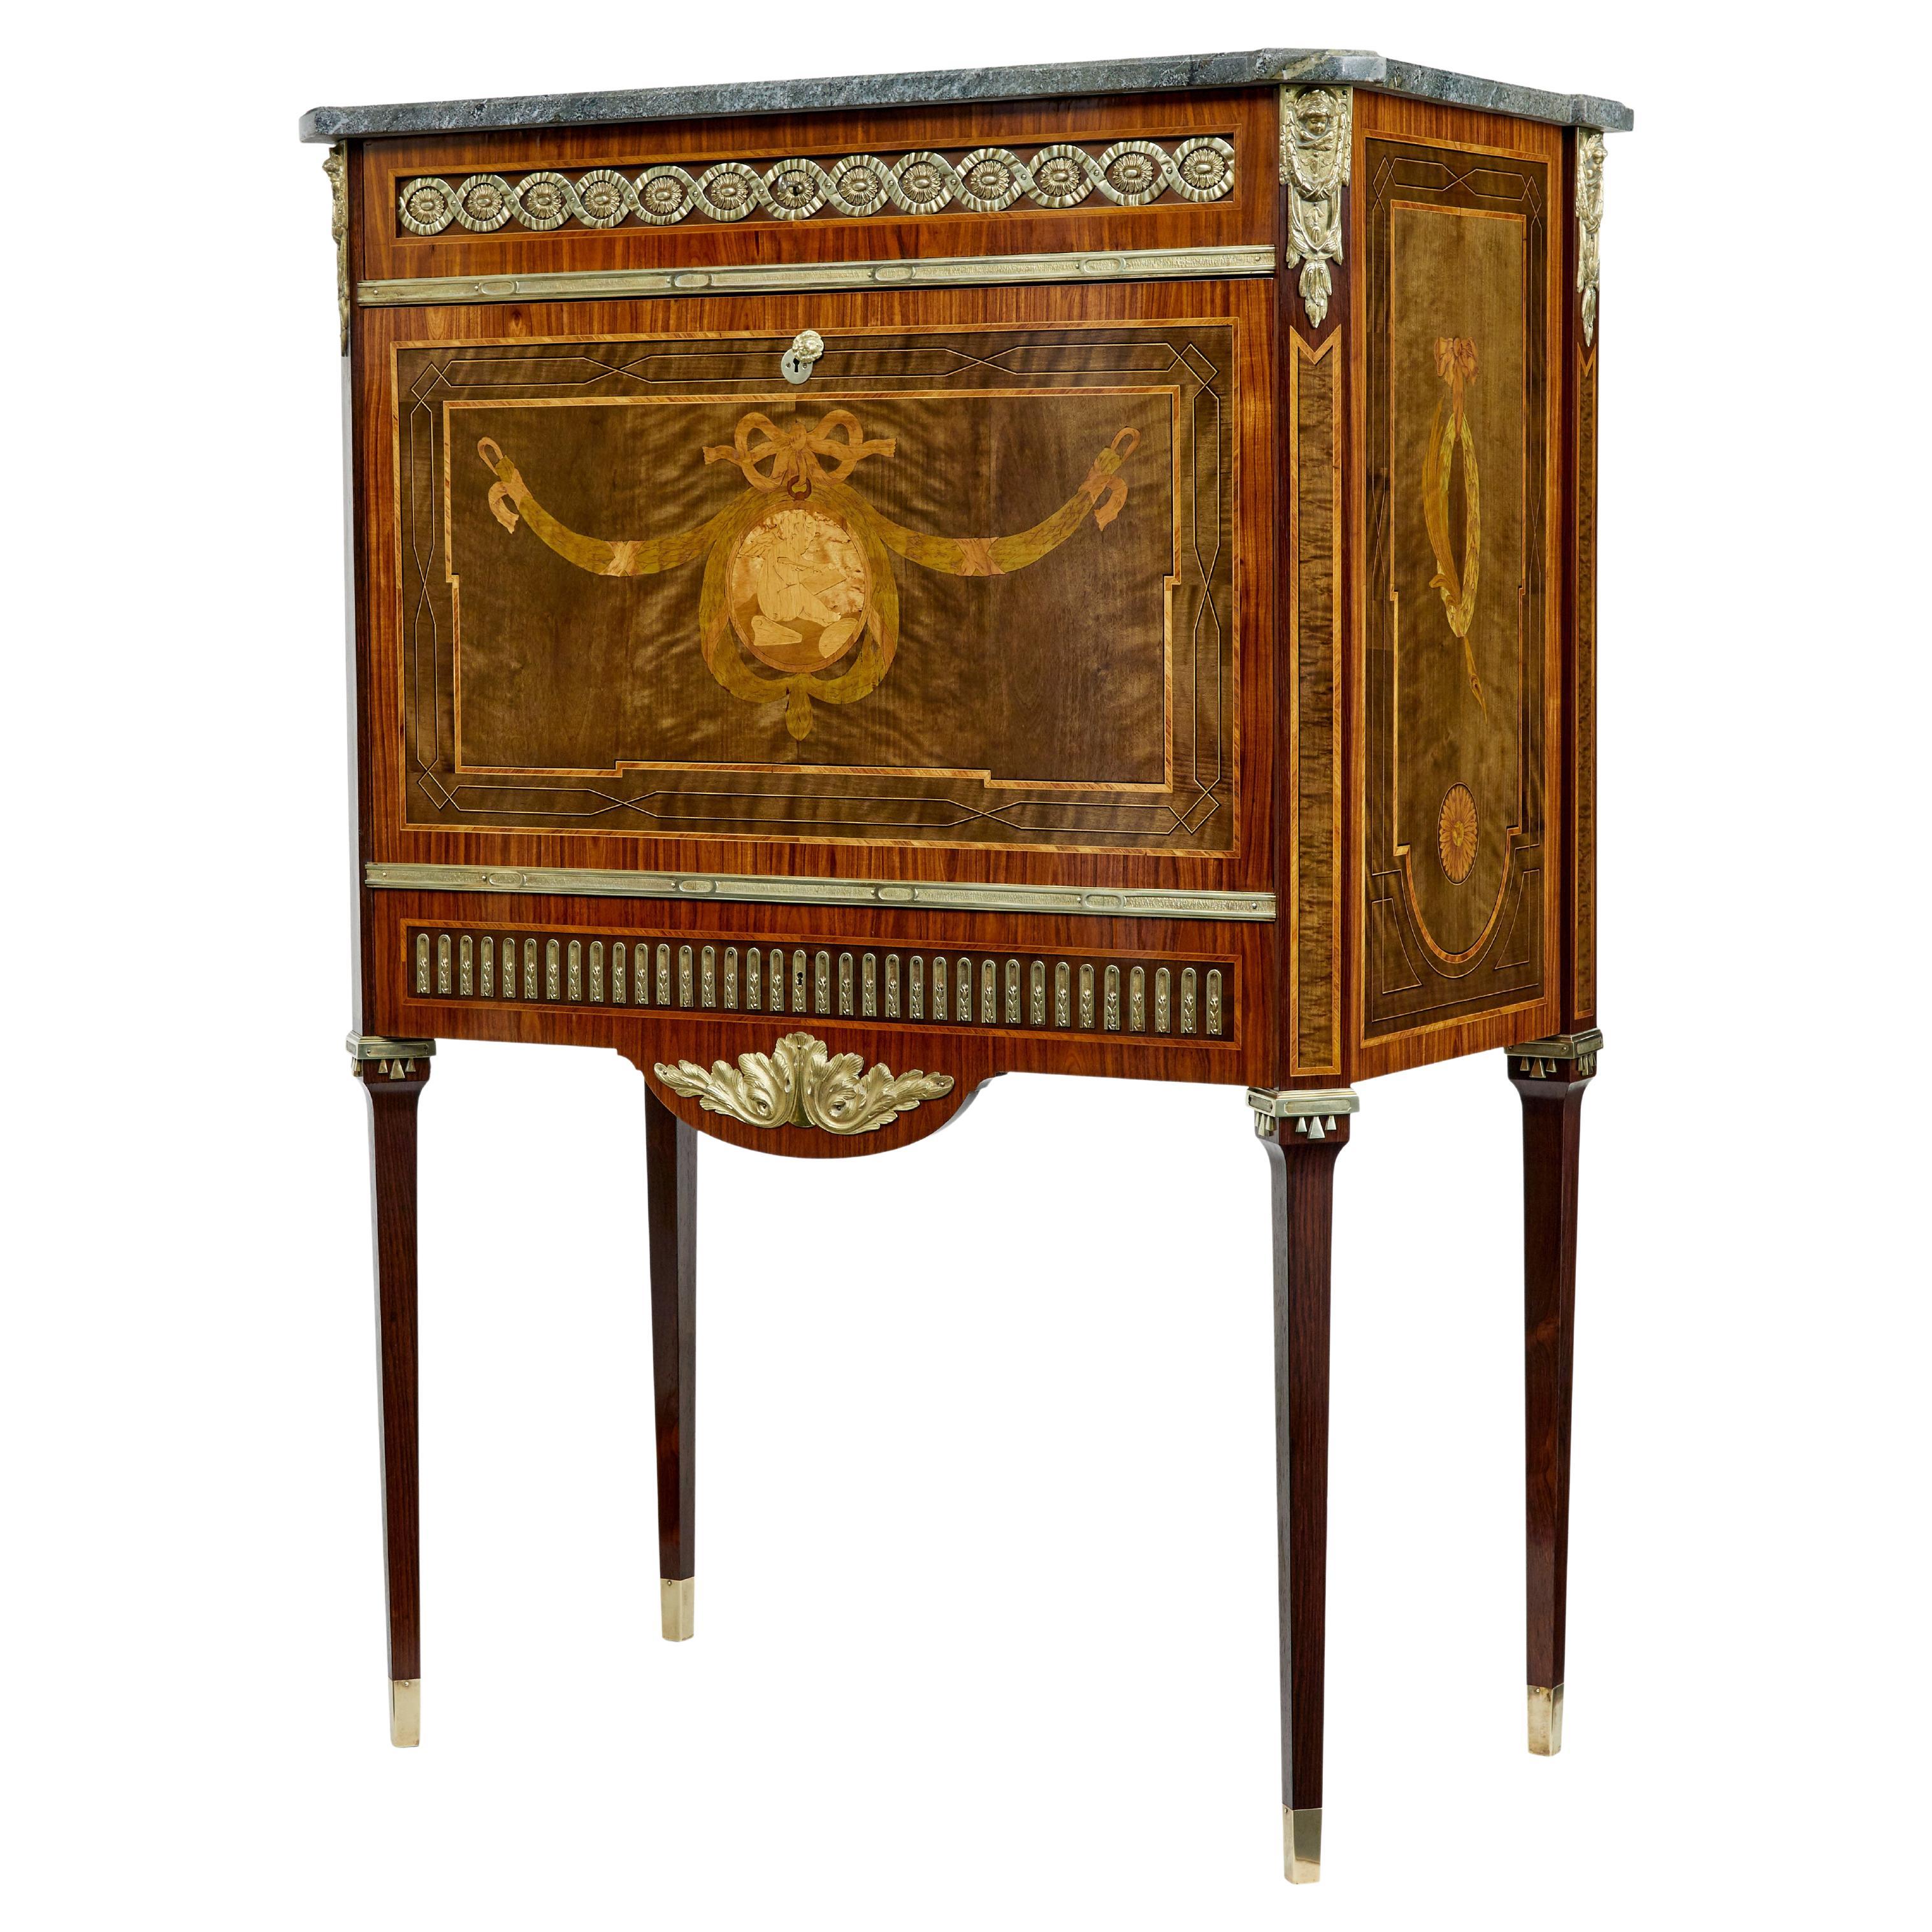 1930’s kingwood inlaid Swedish marble top secretaire For Sale